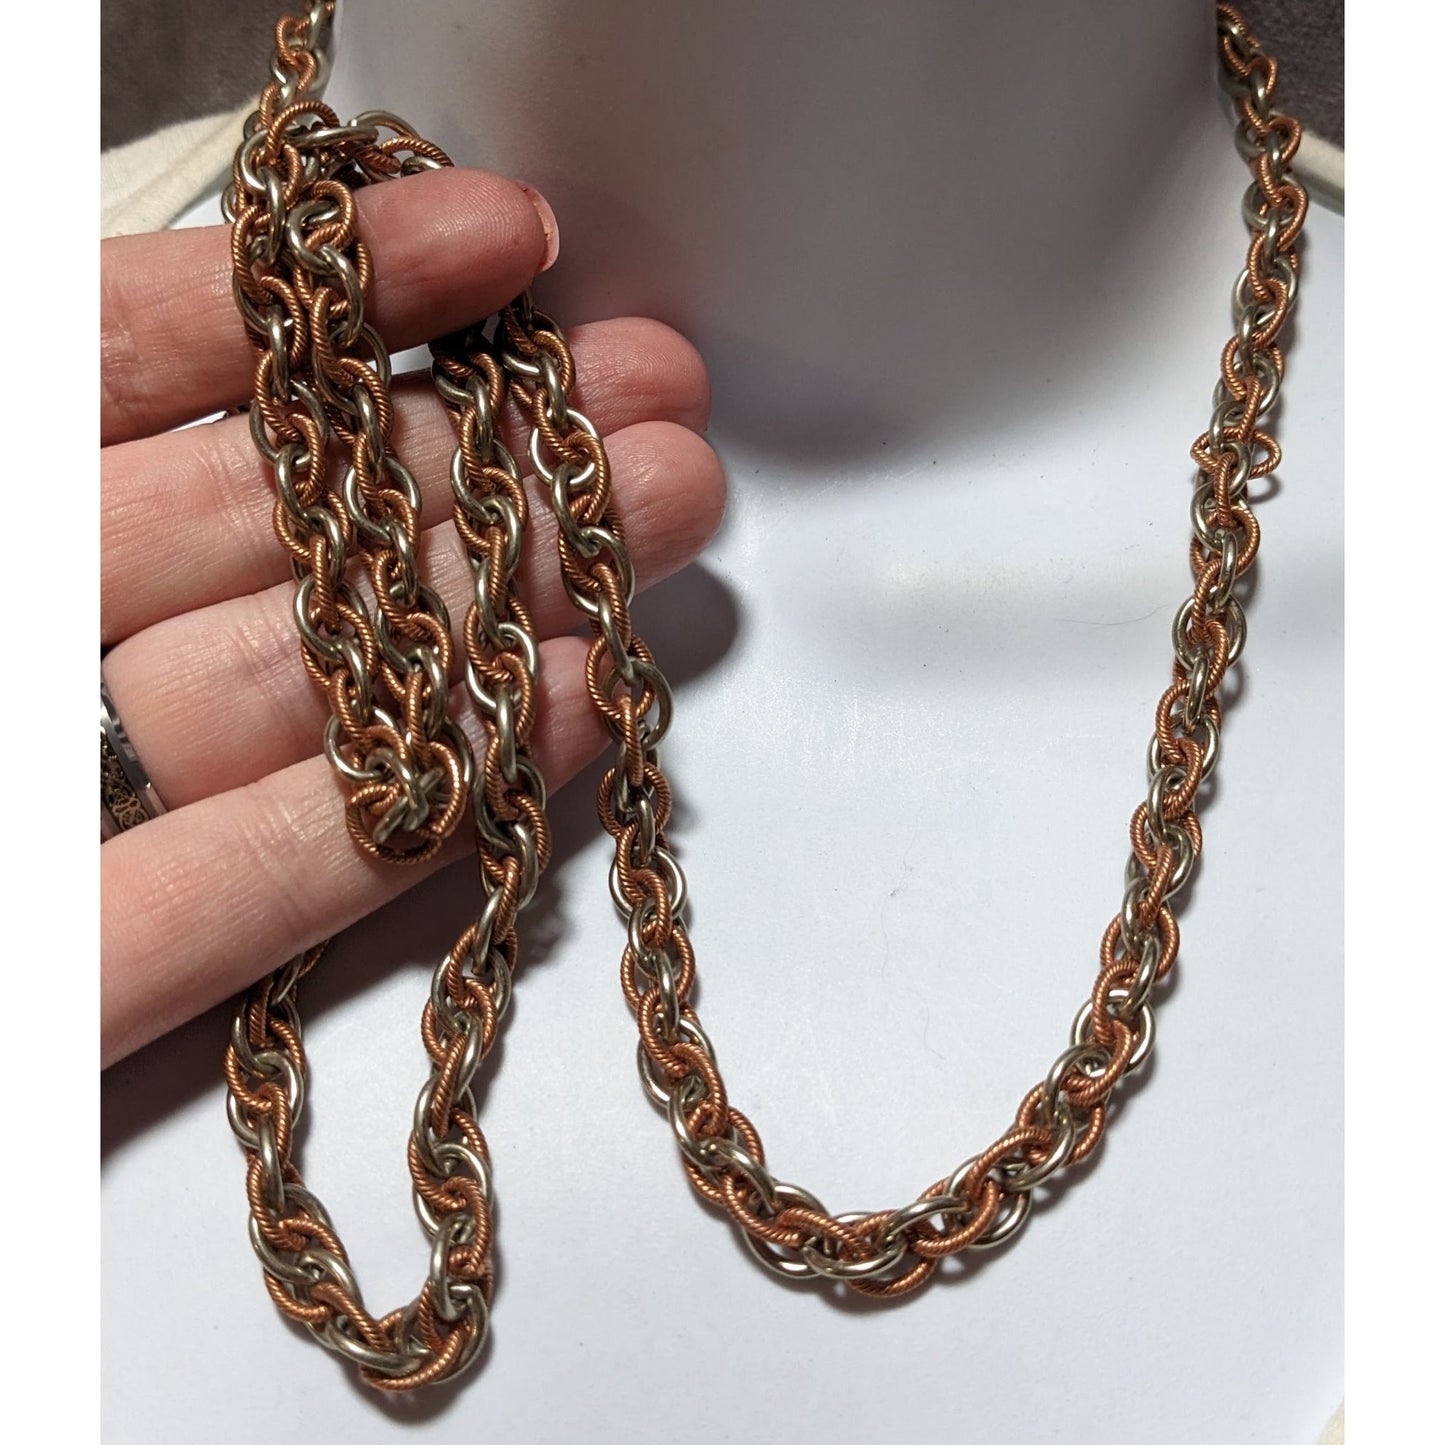 Silver Sopper Intertwined Chain Necklace